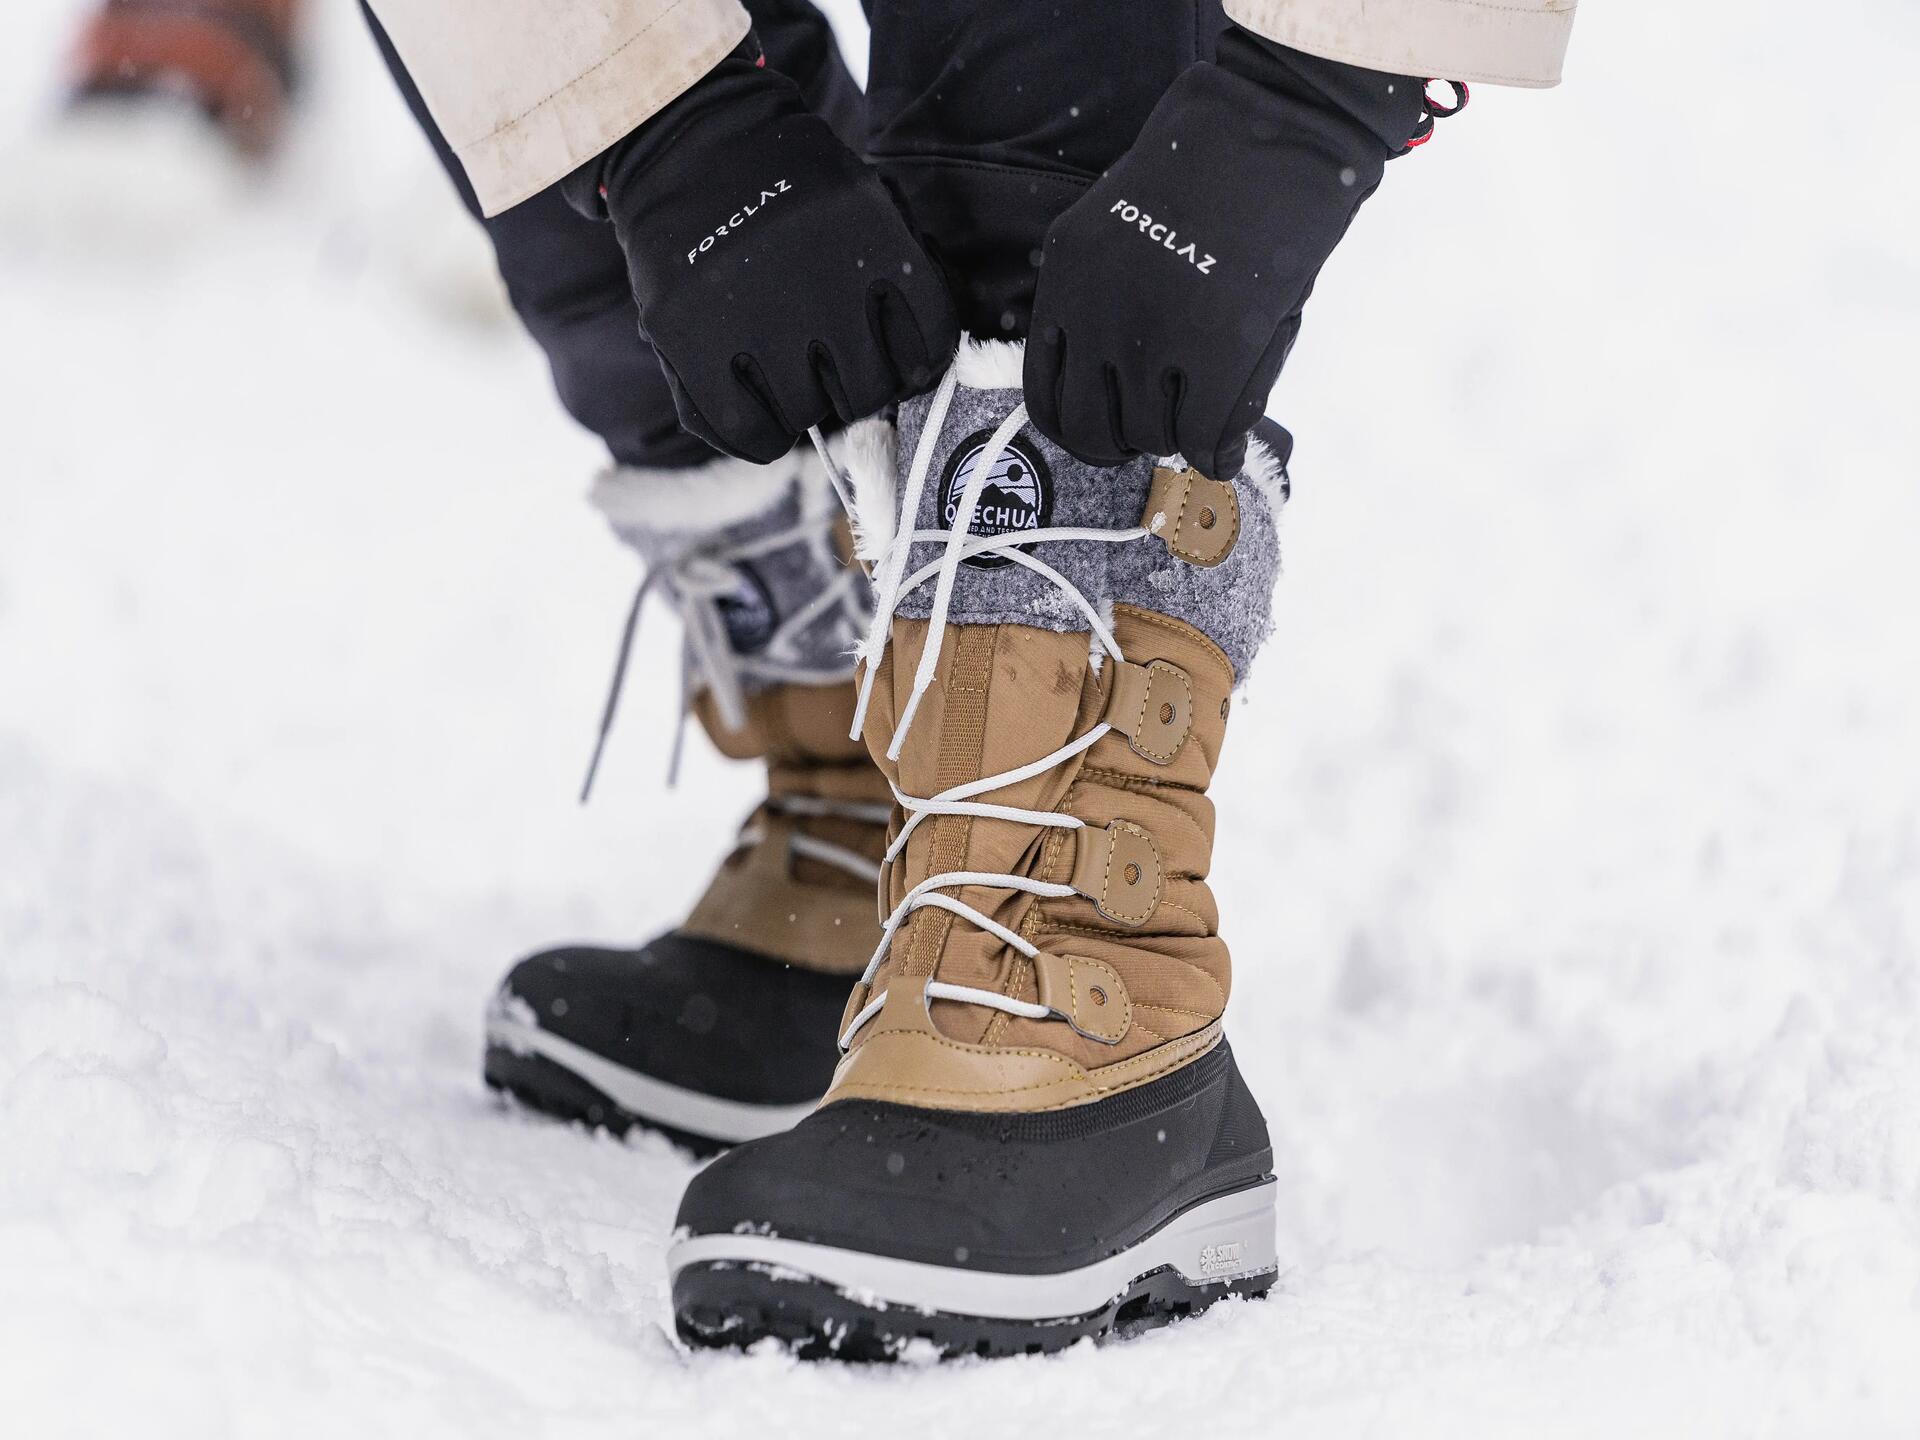 How to choose warm or après-ski boots?